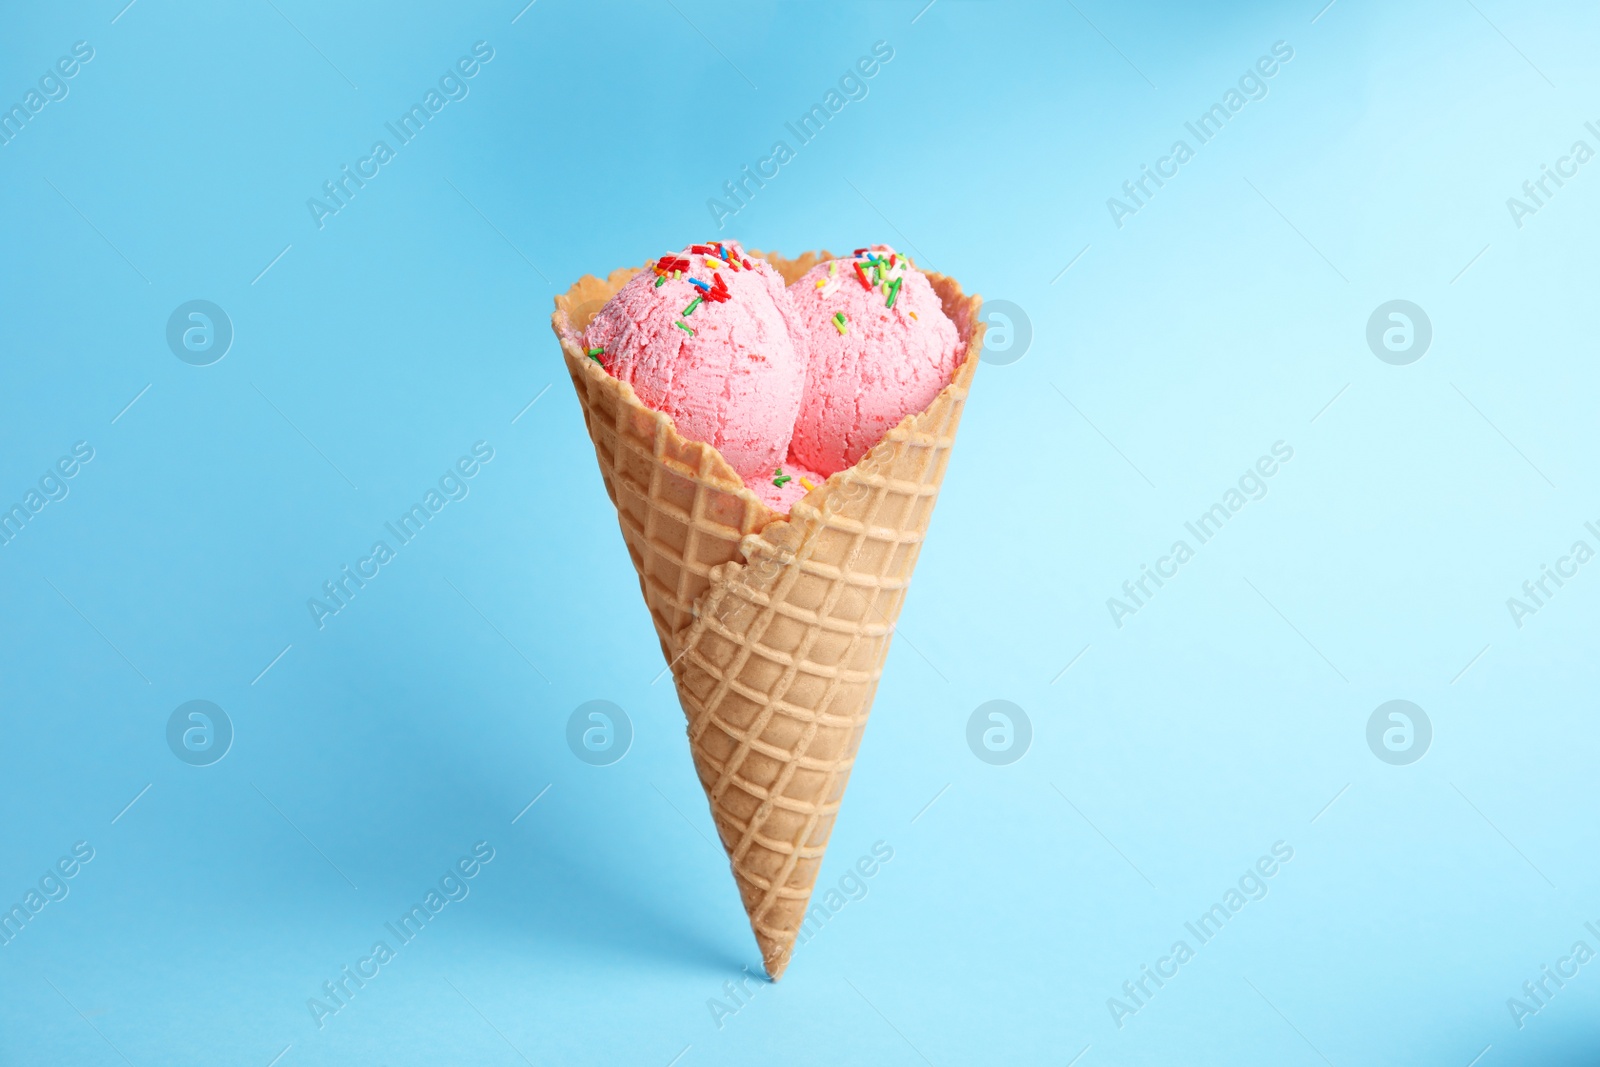 Photo of Delicious ice cream in wafer cone on blue background